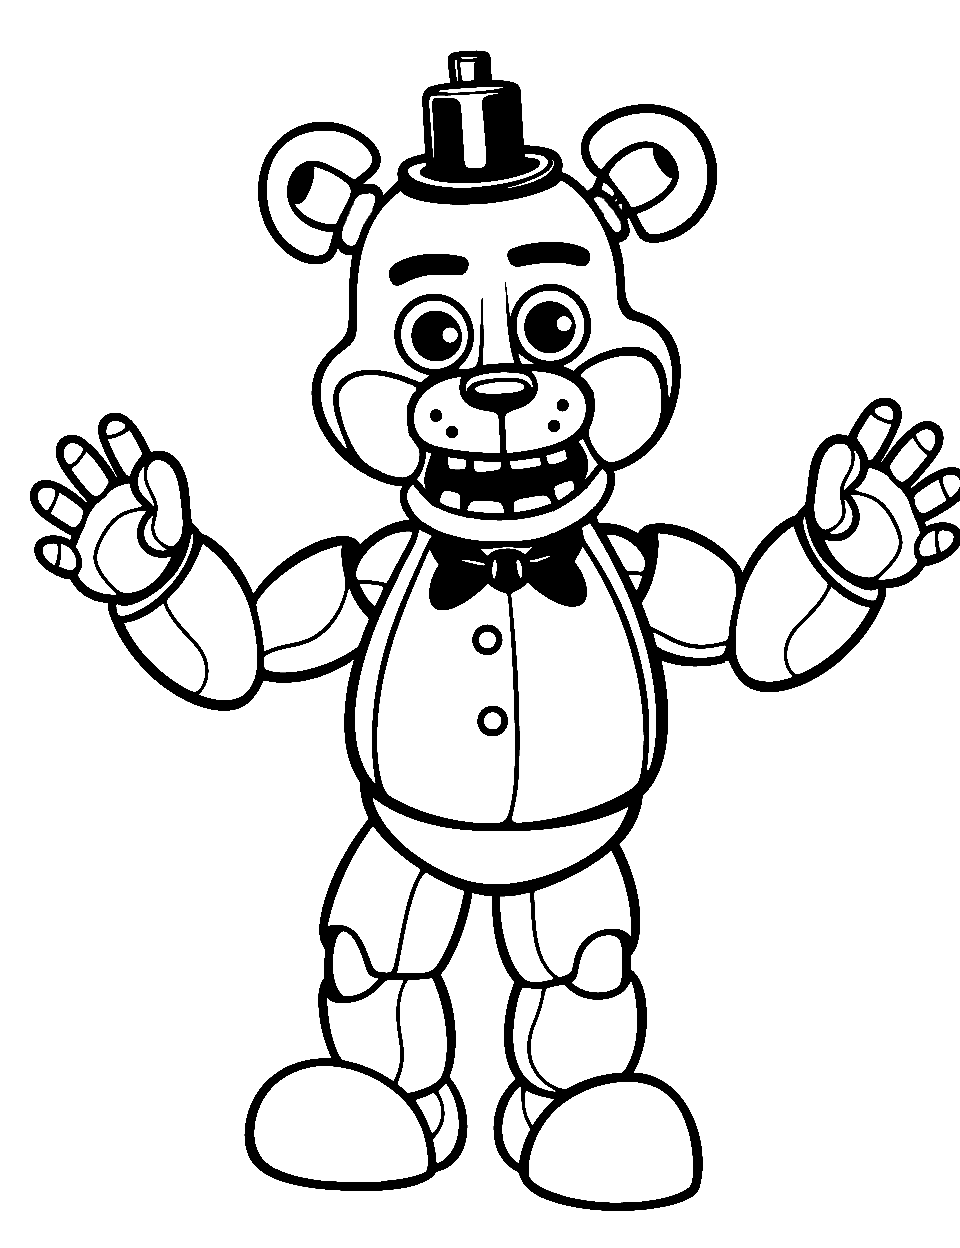 Fun with Funtime Freddy Five Nights at Freddys Coloring Page - Funtime Freddy waving cheerily in a brightly lit room.